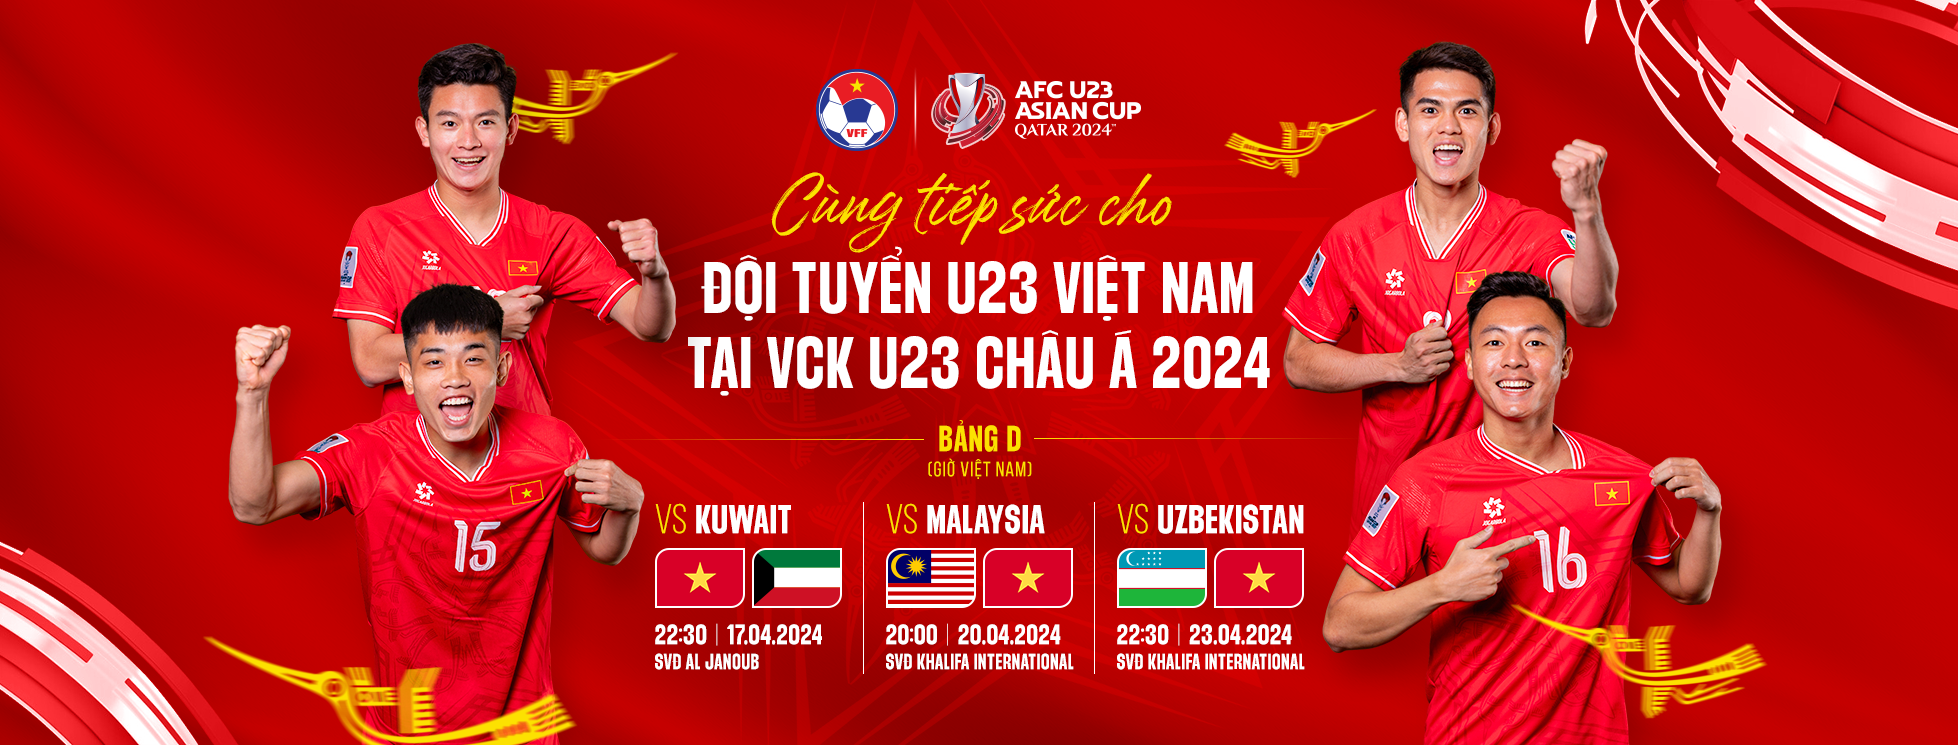 cover-afcu23asiancup2024-1713244281.png